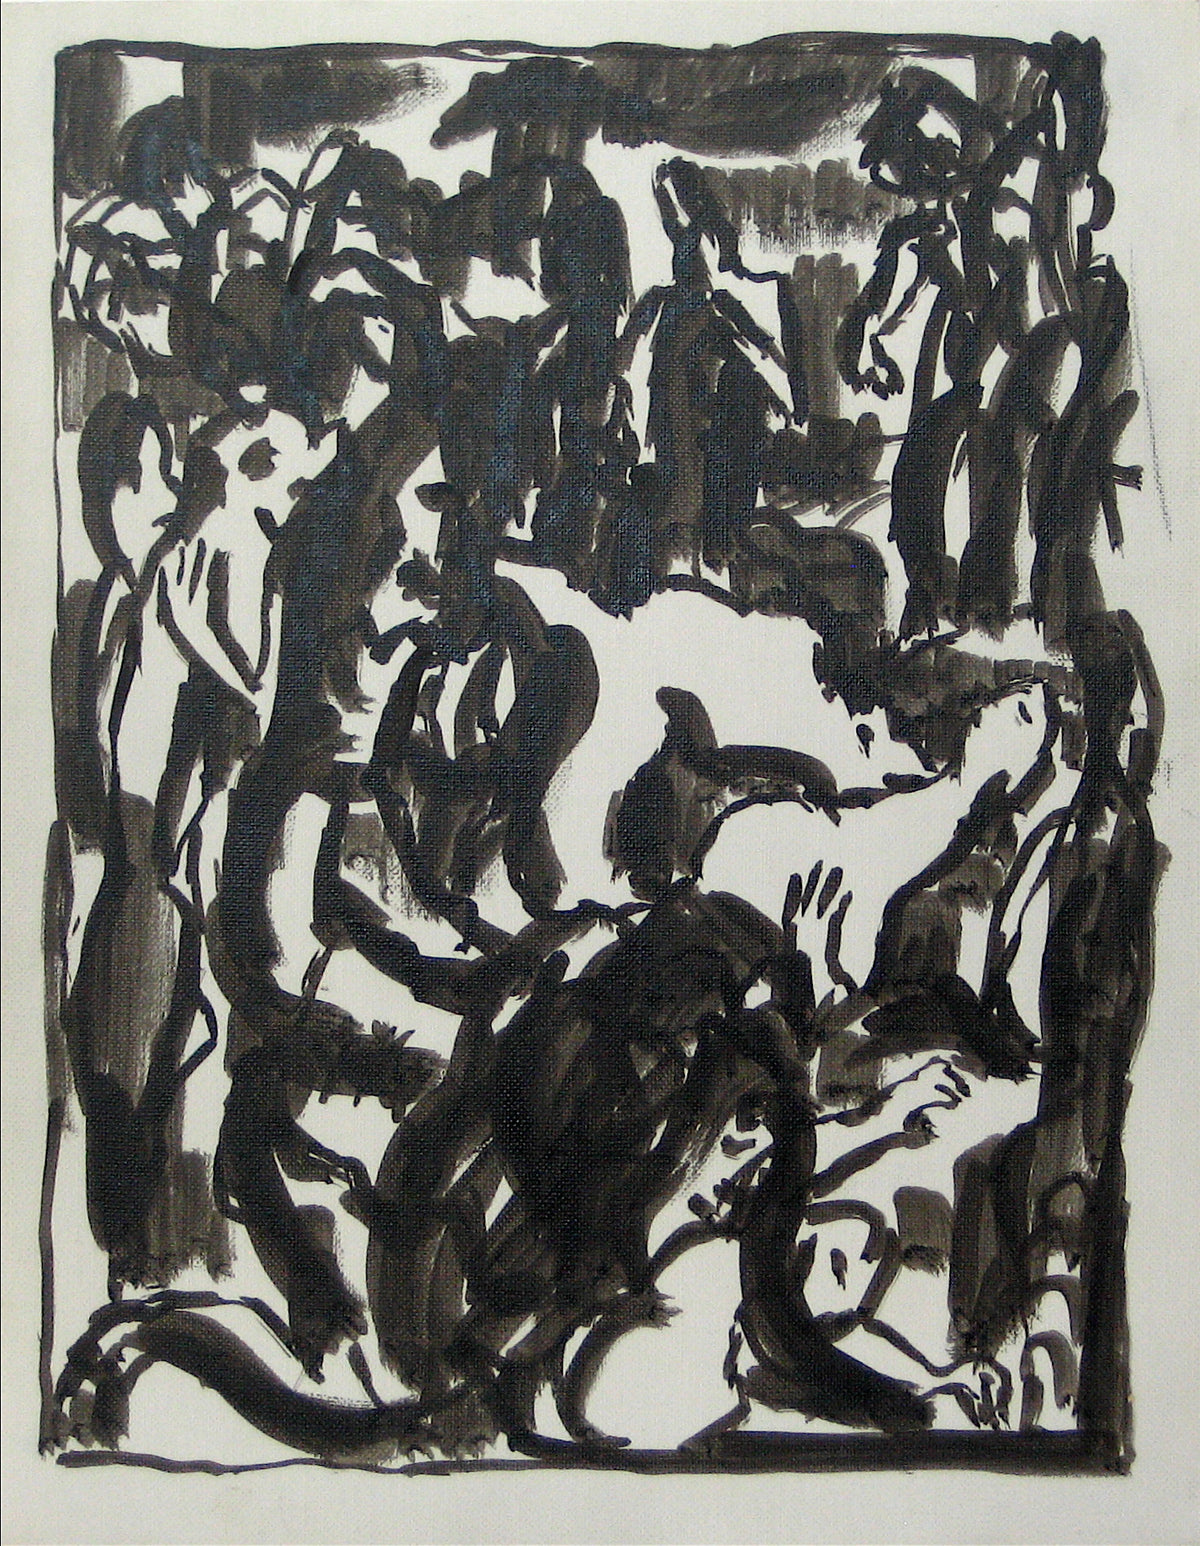 Abstracted Figures in a Scene &lt;br&gt;Early-Mid 20th Century Pen and Ink &lt;br&gt;&lt;br&gt;#13527